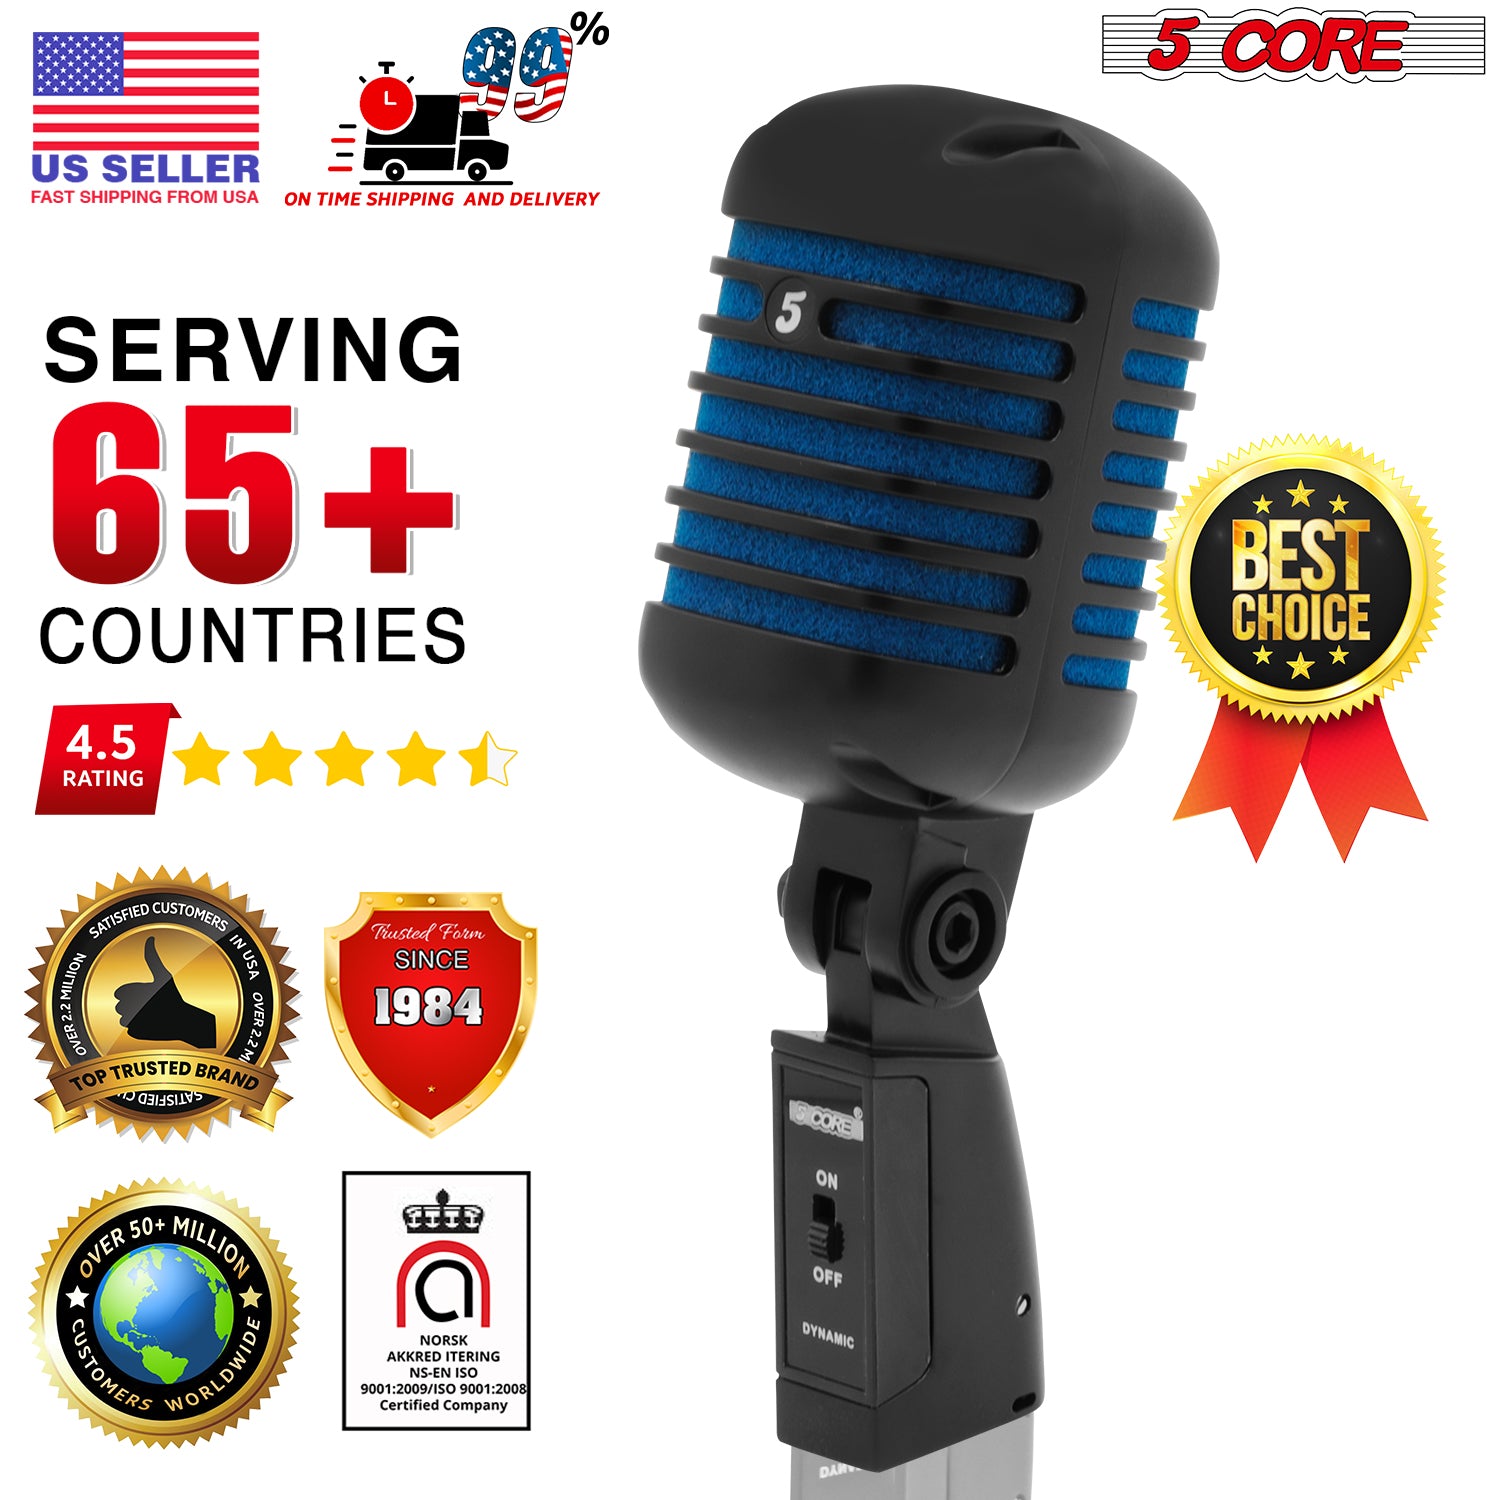 5 Core Classic Retro Dynamic Vocal Microphone Matte Black Blue Old Vintage Style Unidirectional Professional Cardioid Mic for Instrument Live Performance Prop & Studio Recording -RTRO MIC CH BLK-BLU